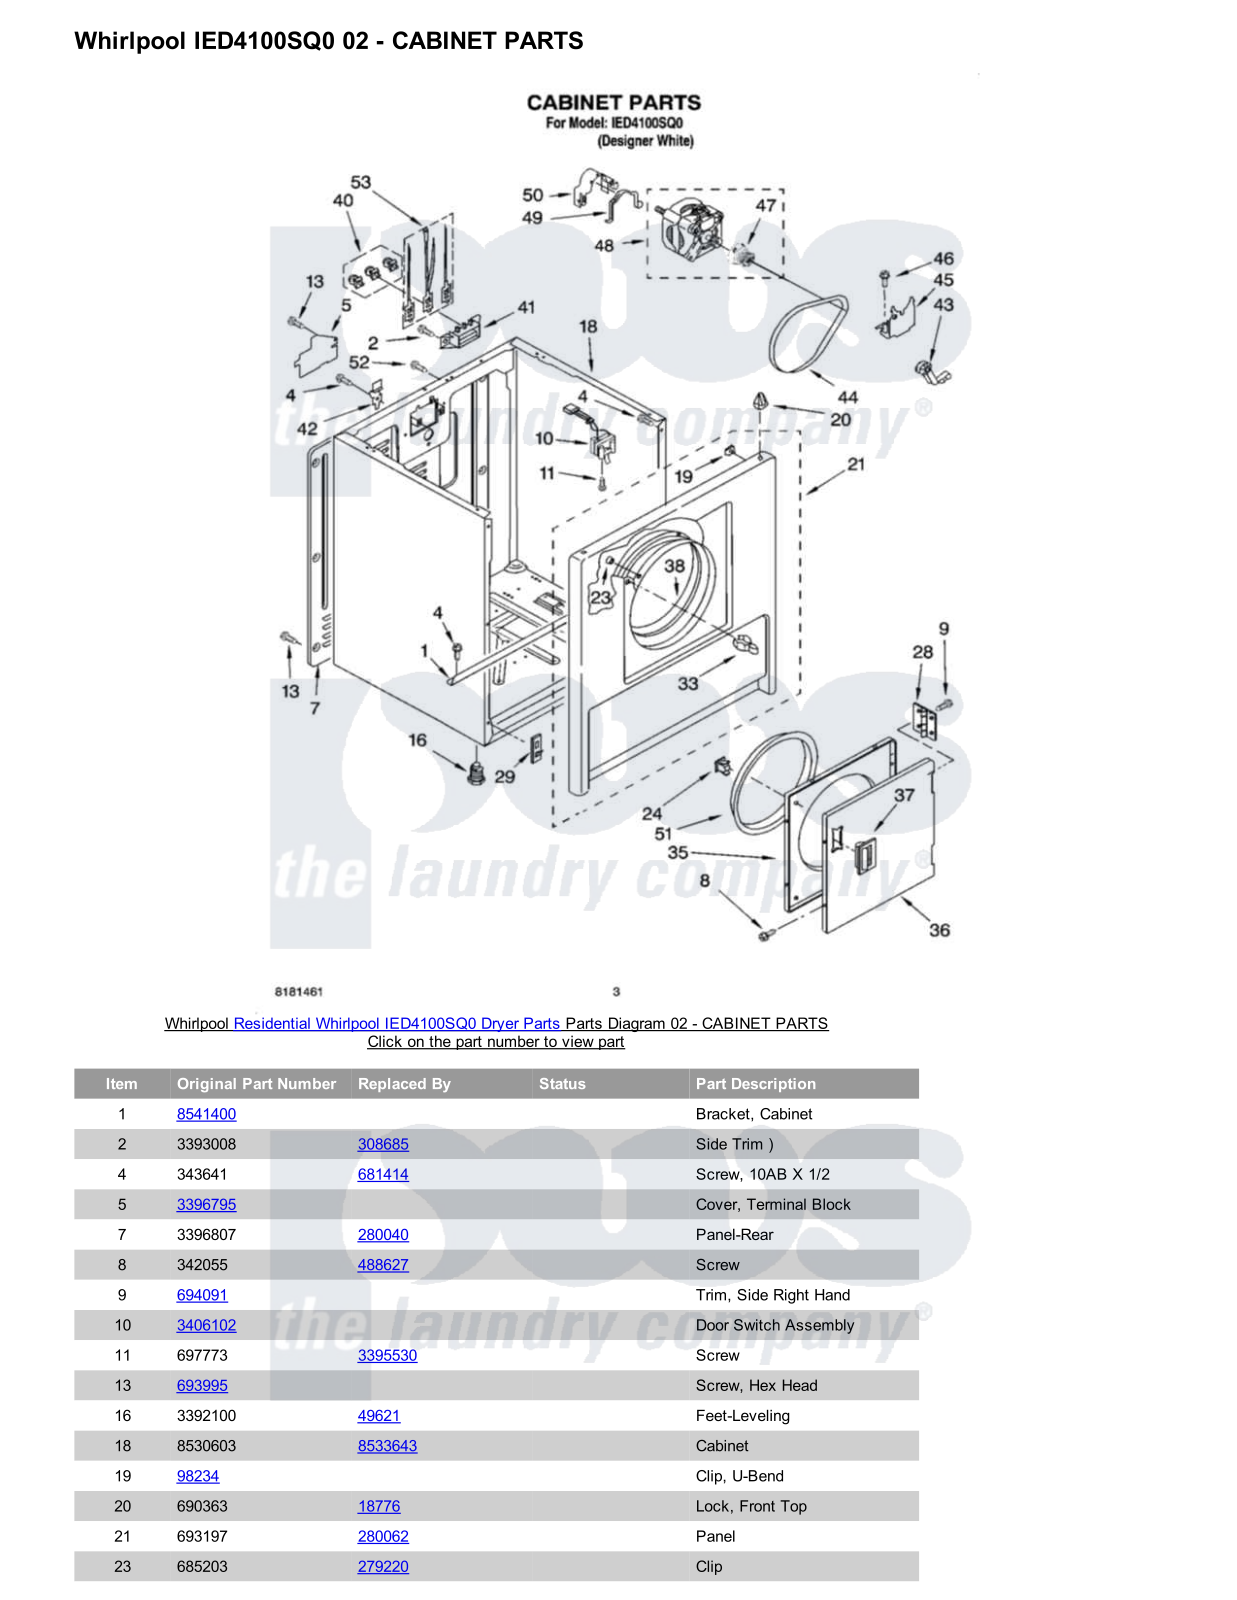 Whirlpool IED4100SQ0 Parts Diagram